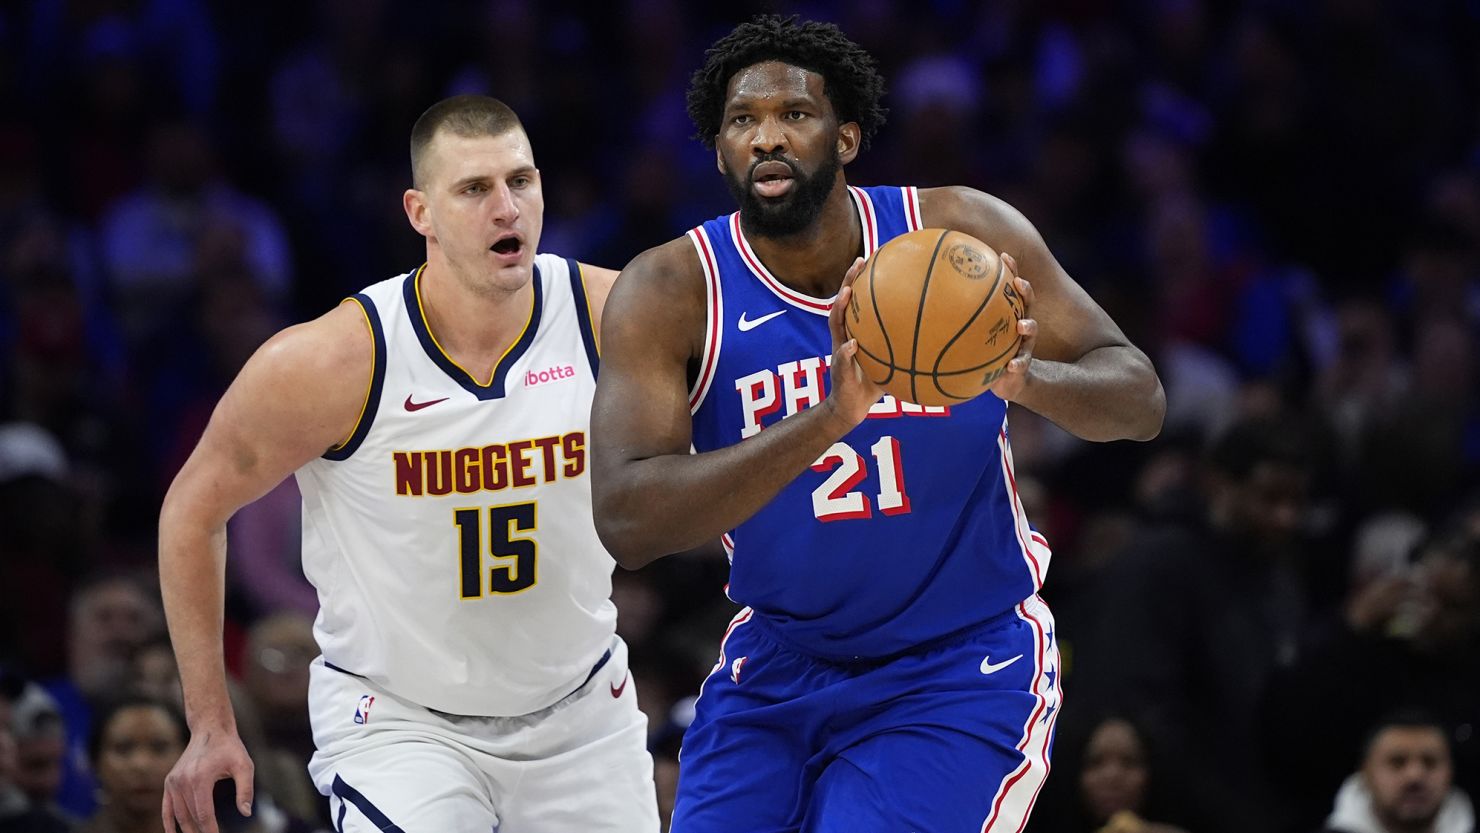 Philadelphia 76ers beat the Denver Nuggets, 126121, in a showdown of